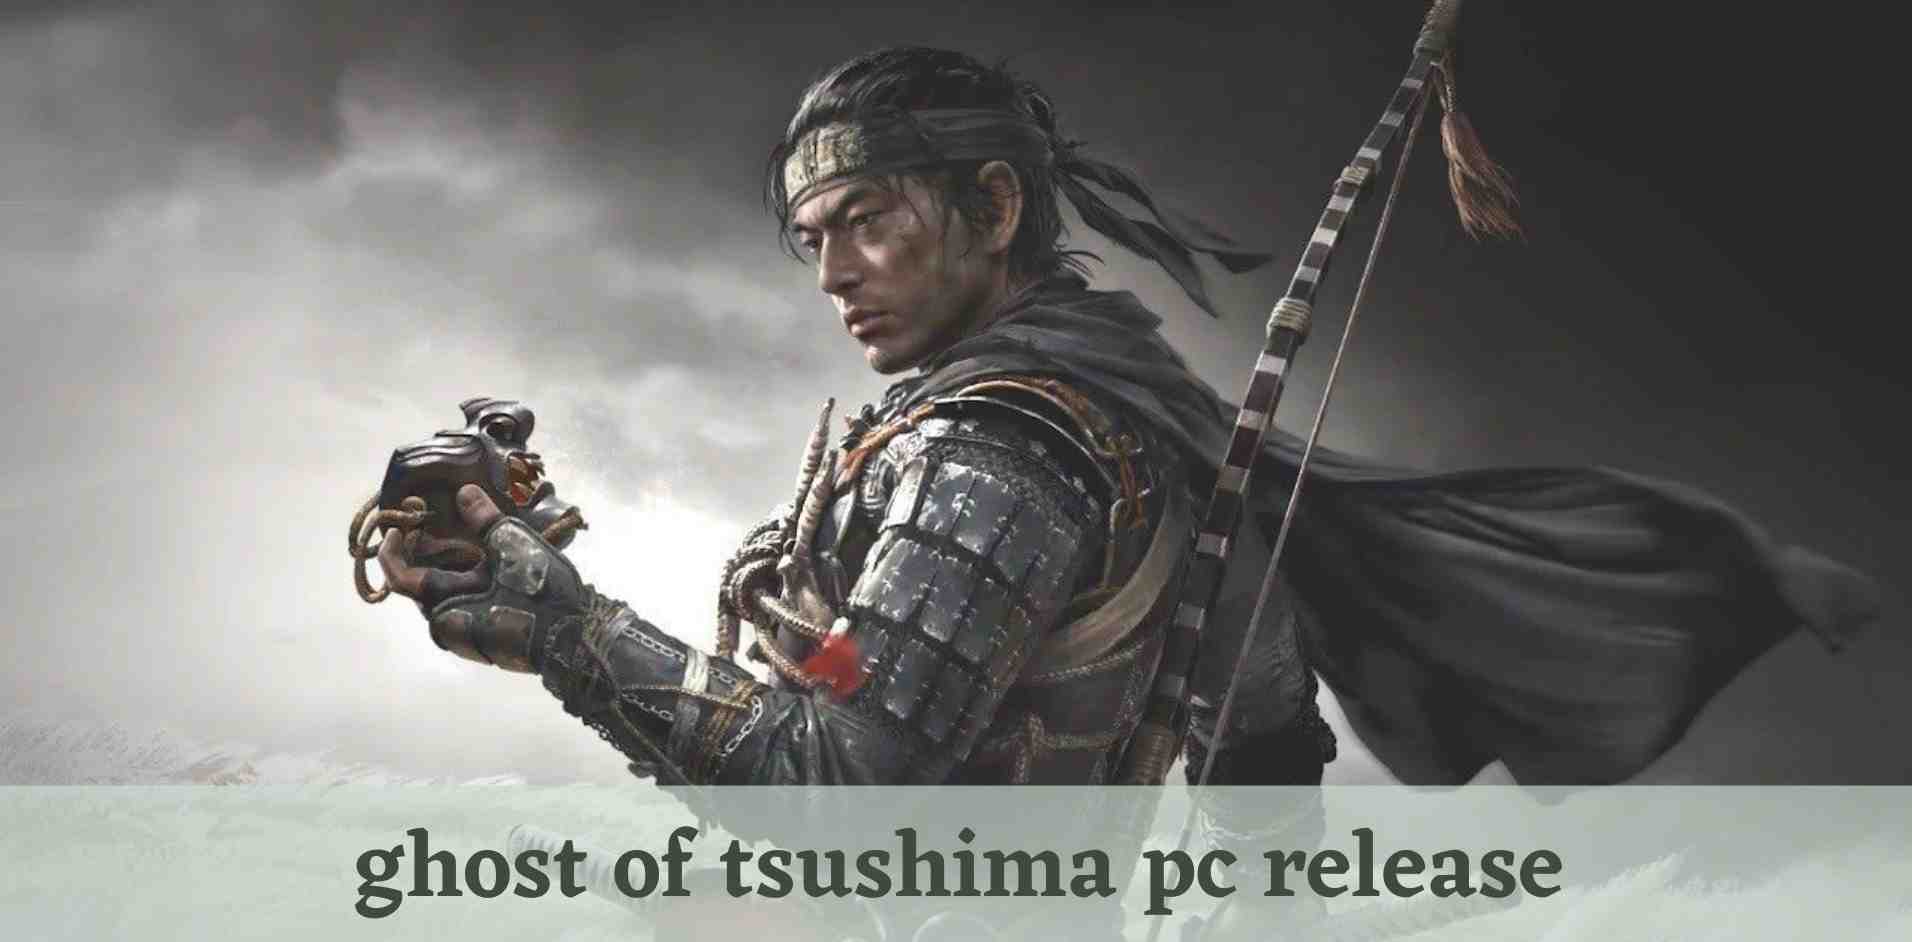 ghost of tsushima pc release